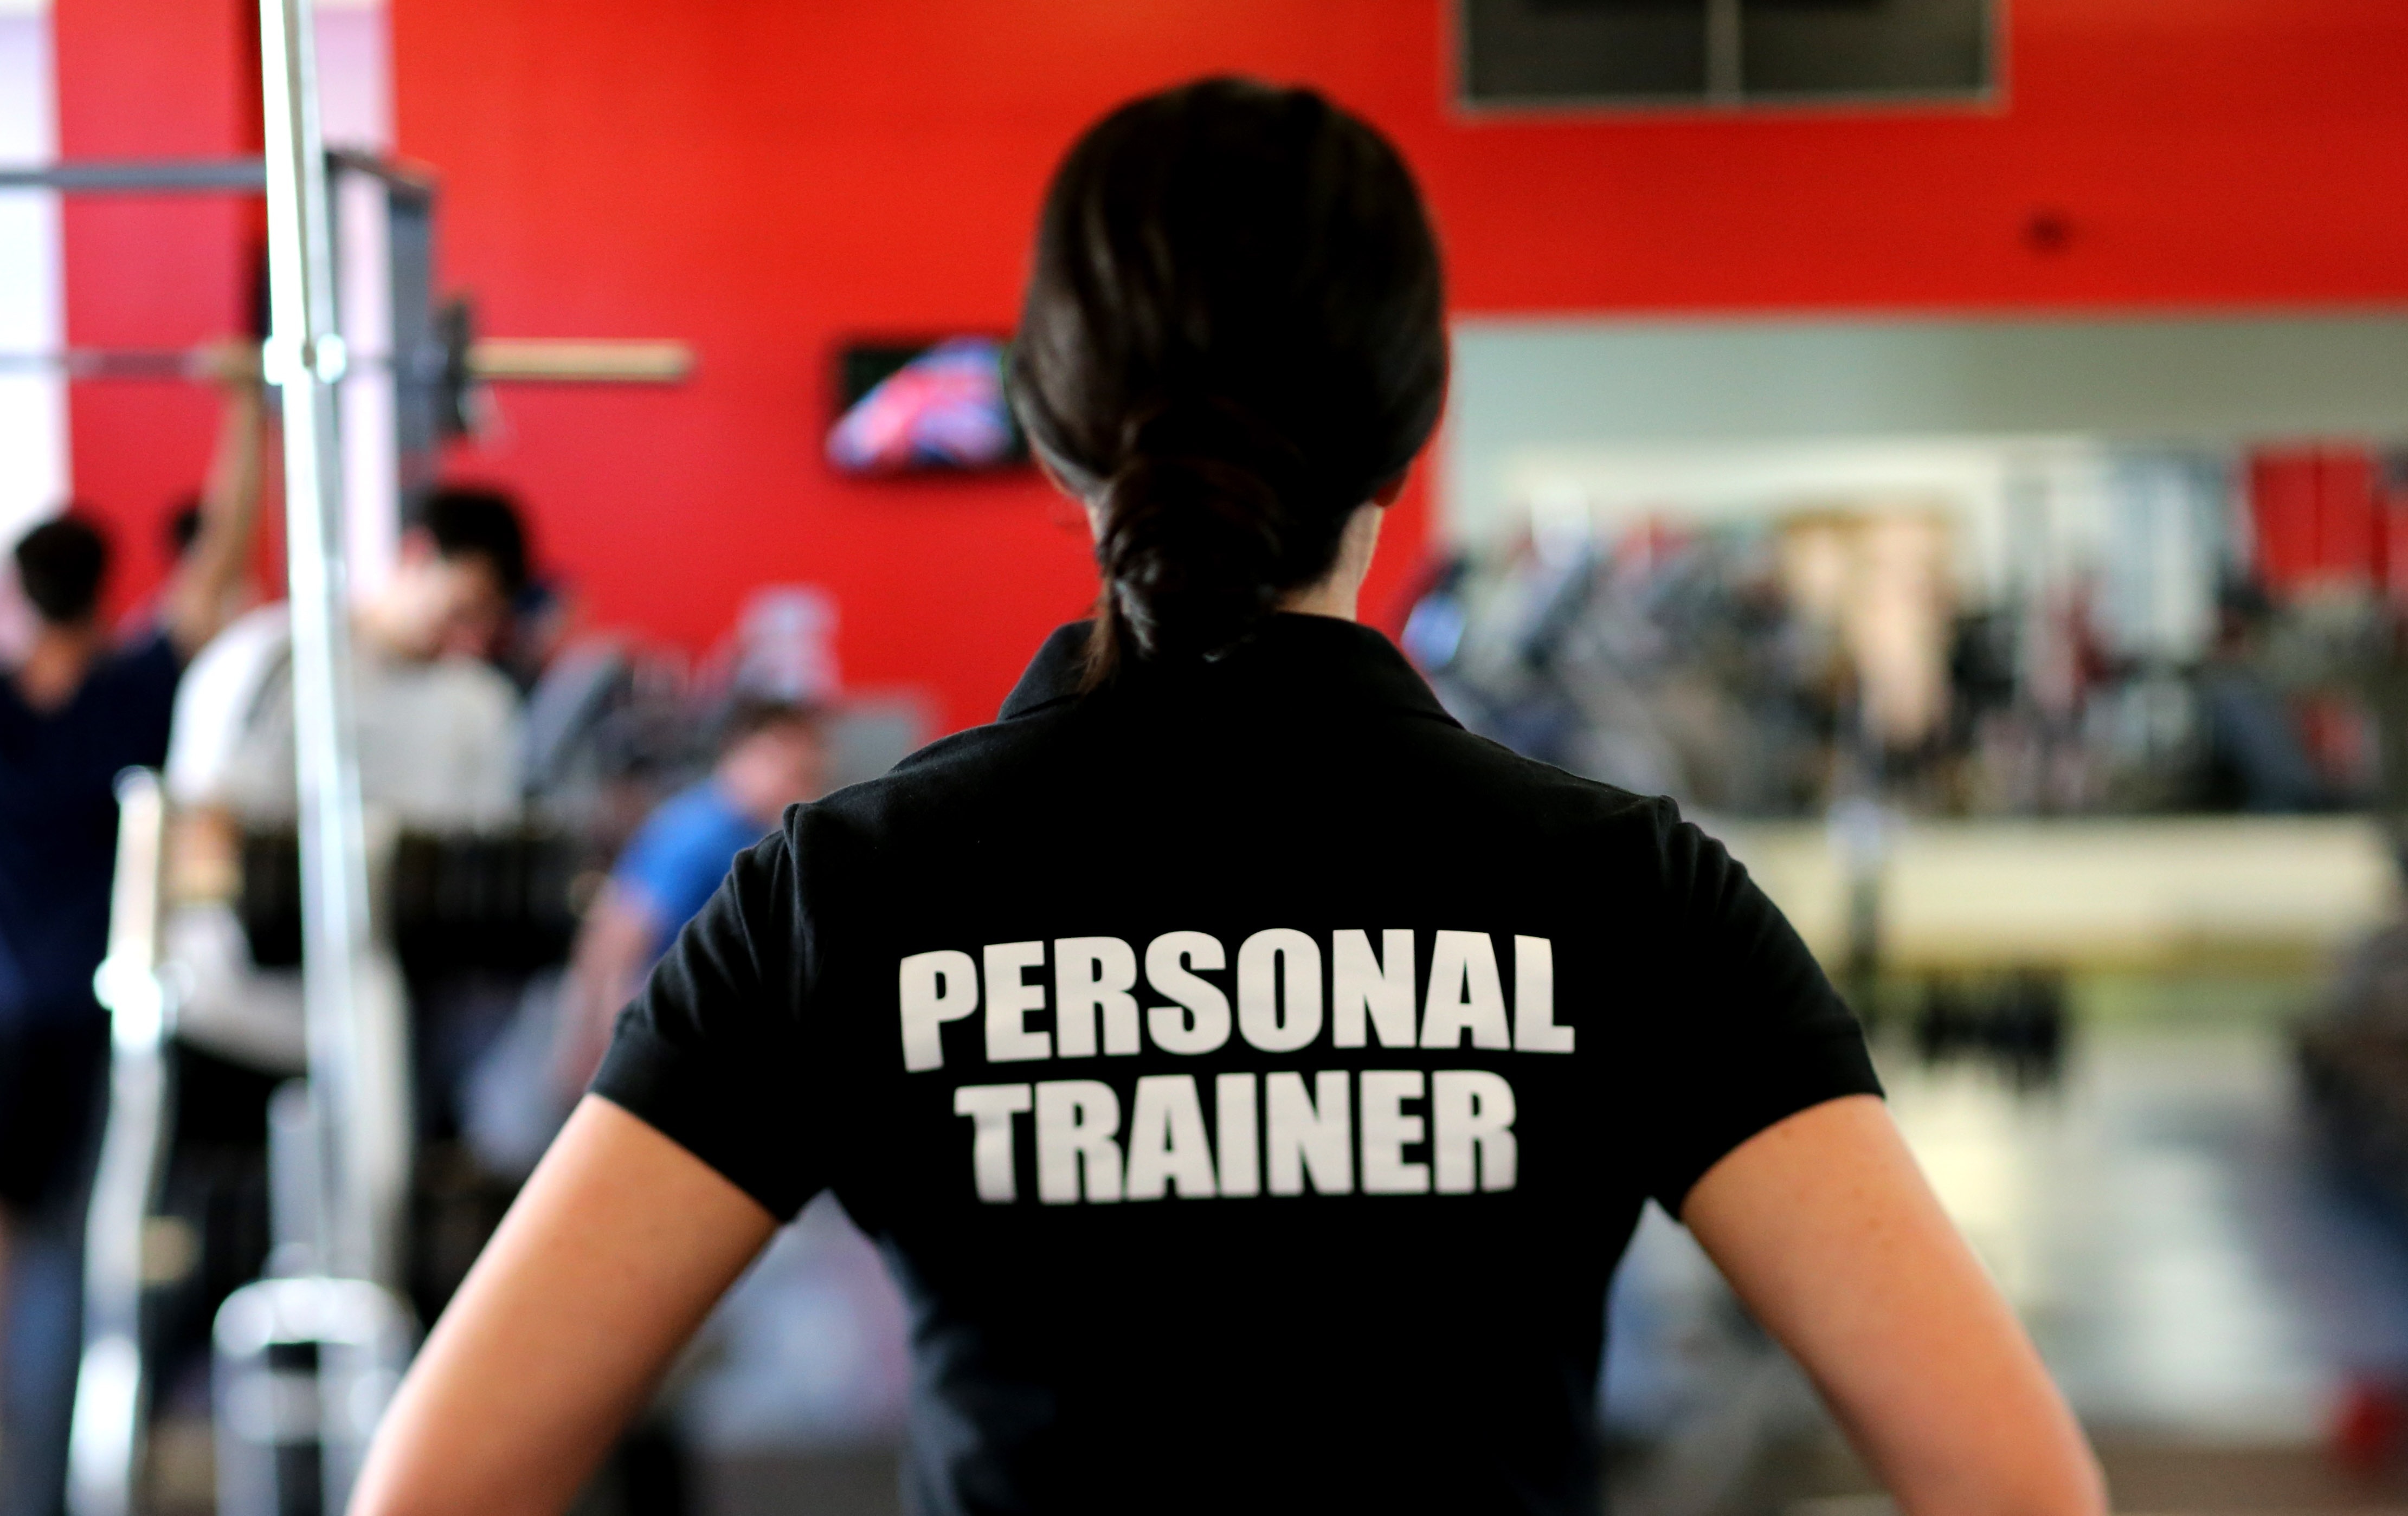 personal trainer free image Peakpx